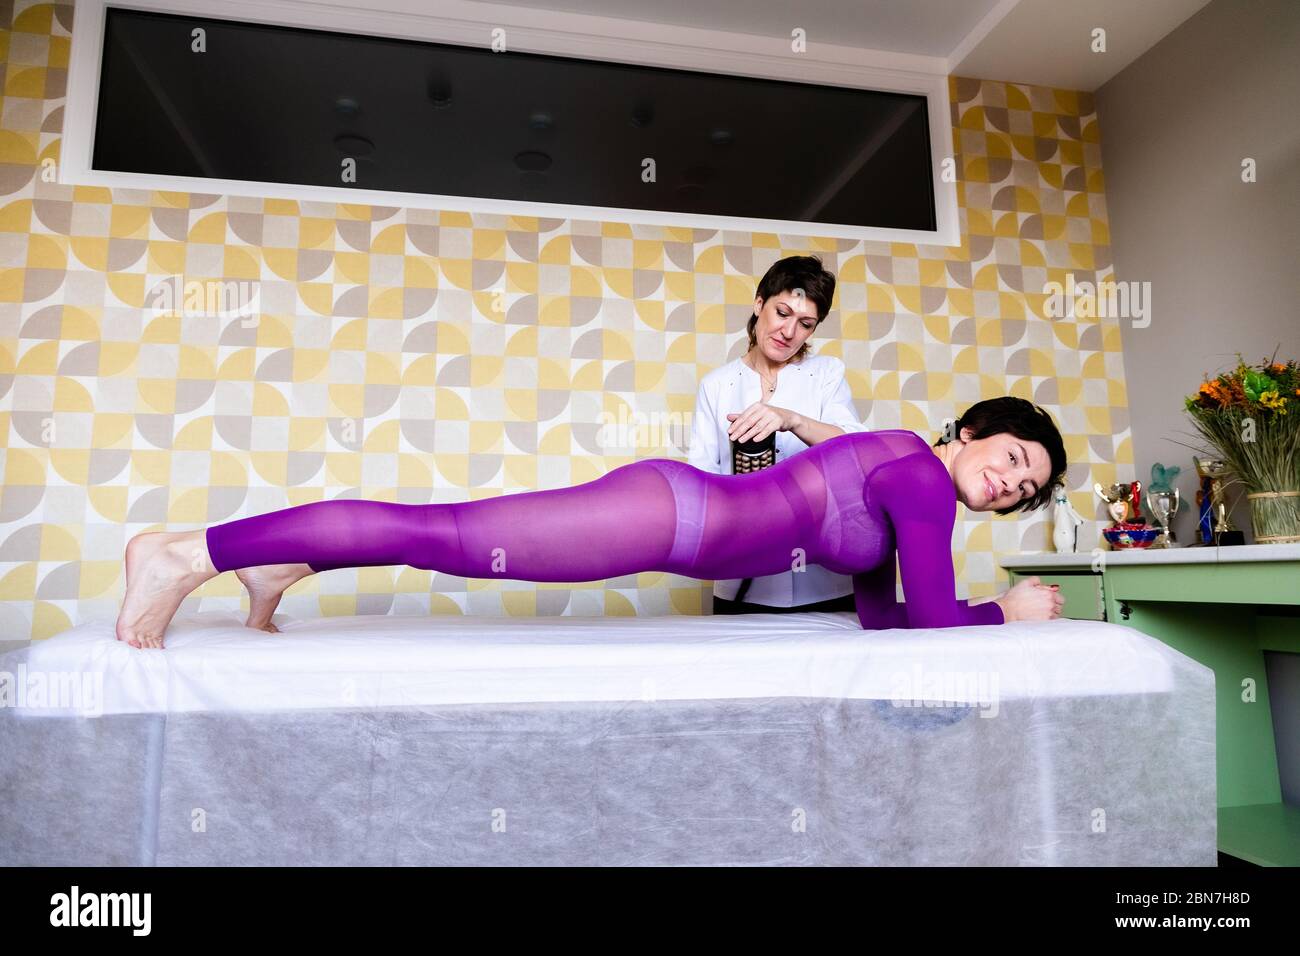 Lymphatic drainage massage LPG or R-sleek apparatus process. Woman in white  suit getting anti cellulite massage in a beauty salon. Skin and body care  Stock Photo - Alamy